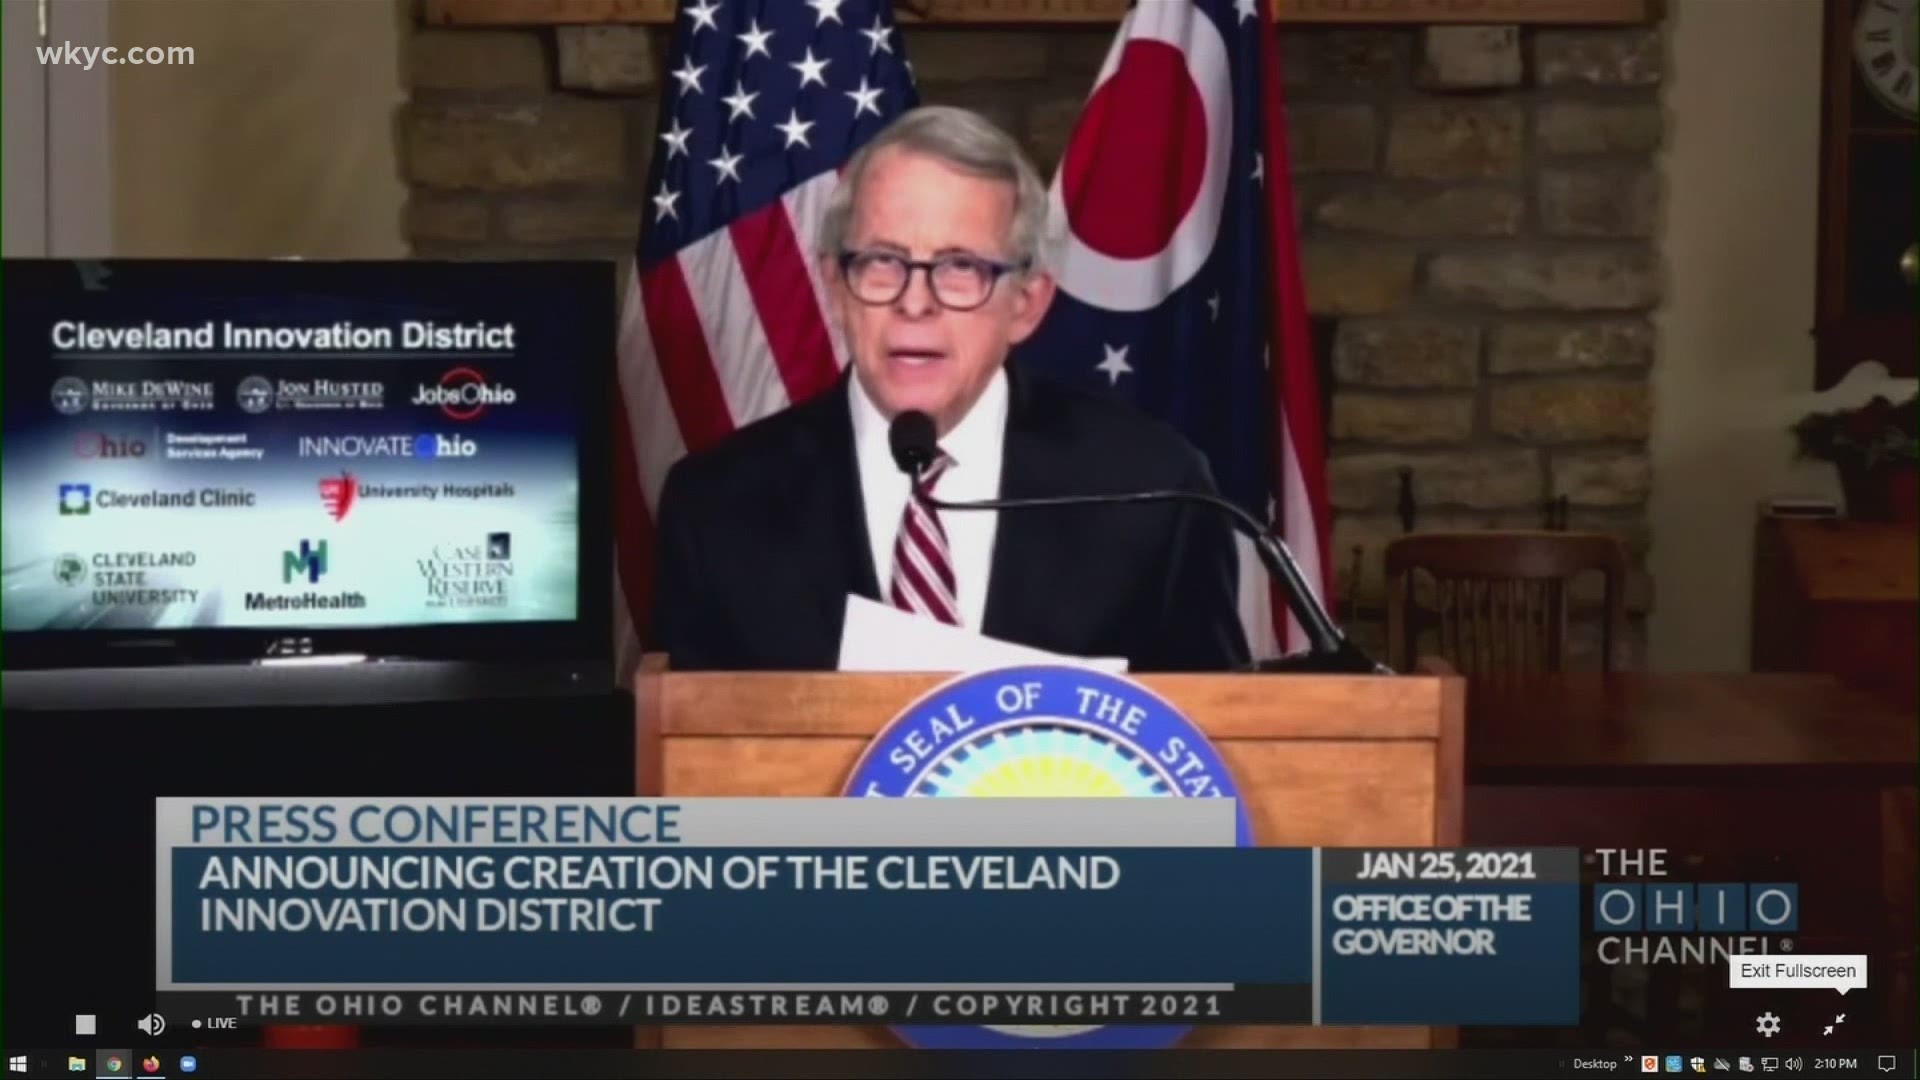 DeWine held a news conference Monday detailing the creation of the Cleveland Innovation District. Laura Caso has more about the new investment in our area.